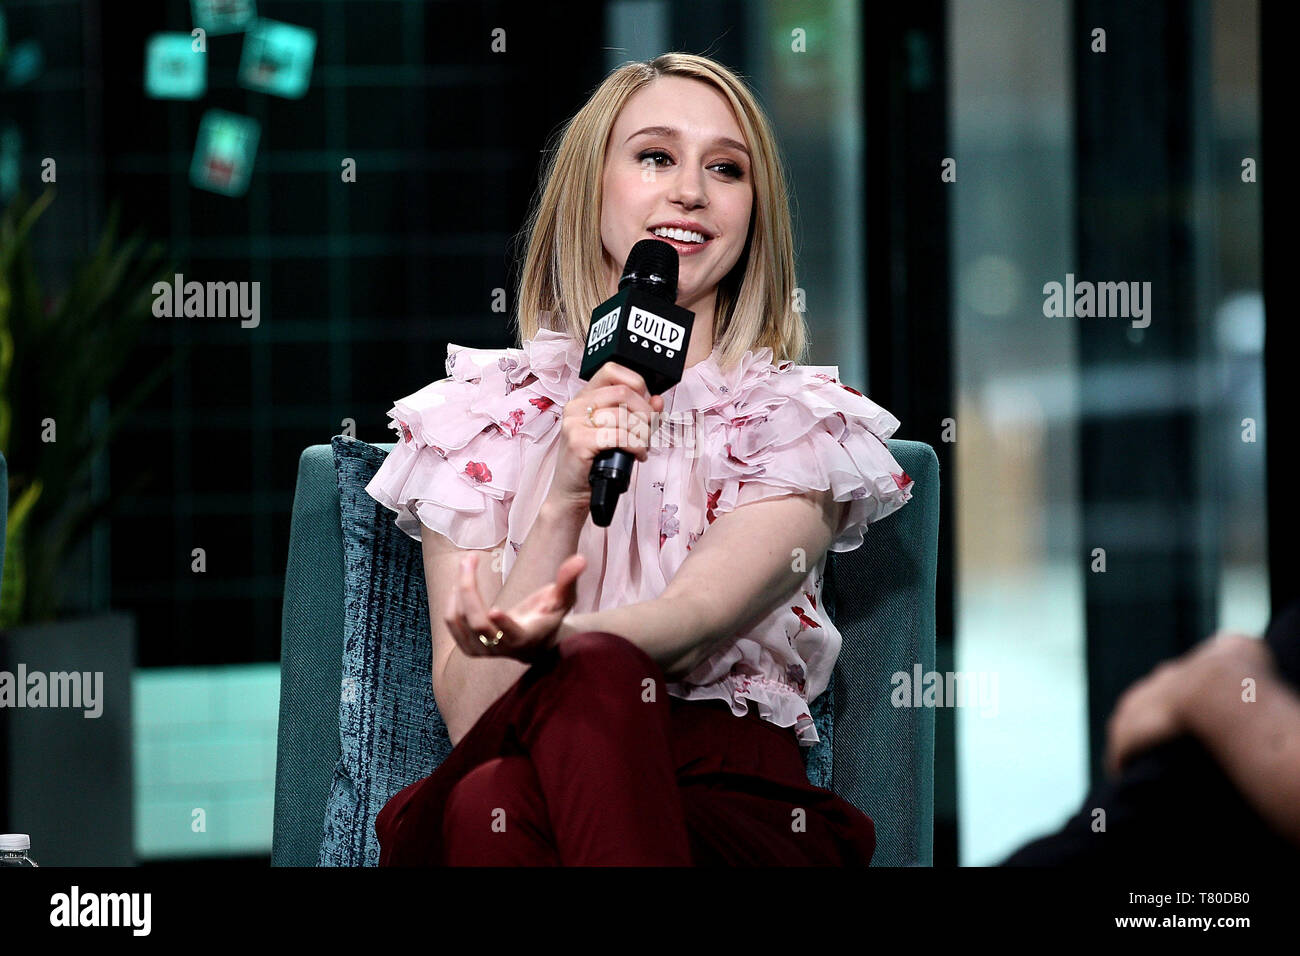 New York, USA. 9 May, 2019. Taissa Farmiga at the BUILD Series with Taissa Farmiga and Crispin Glover, discussing the film "We Have Always Lived in the Castle" at BUILD Studio. Credit: Steve Mack/Alamy Live News Stock Photo